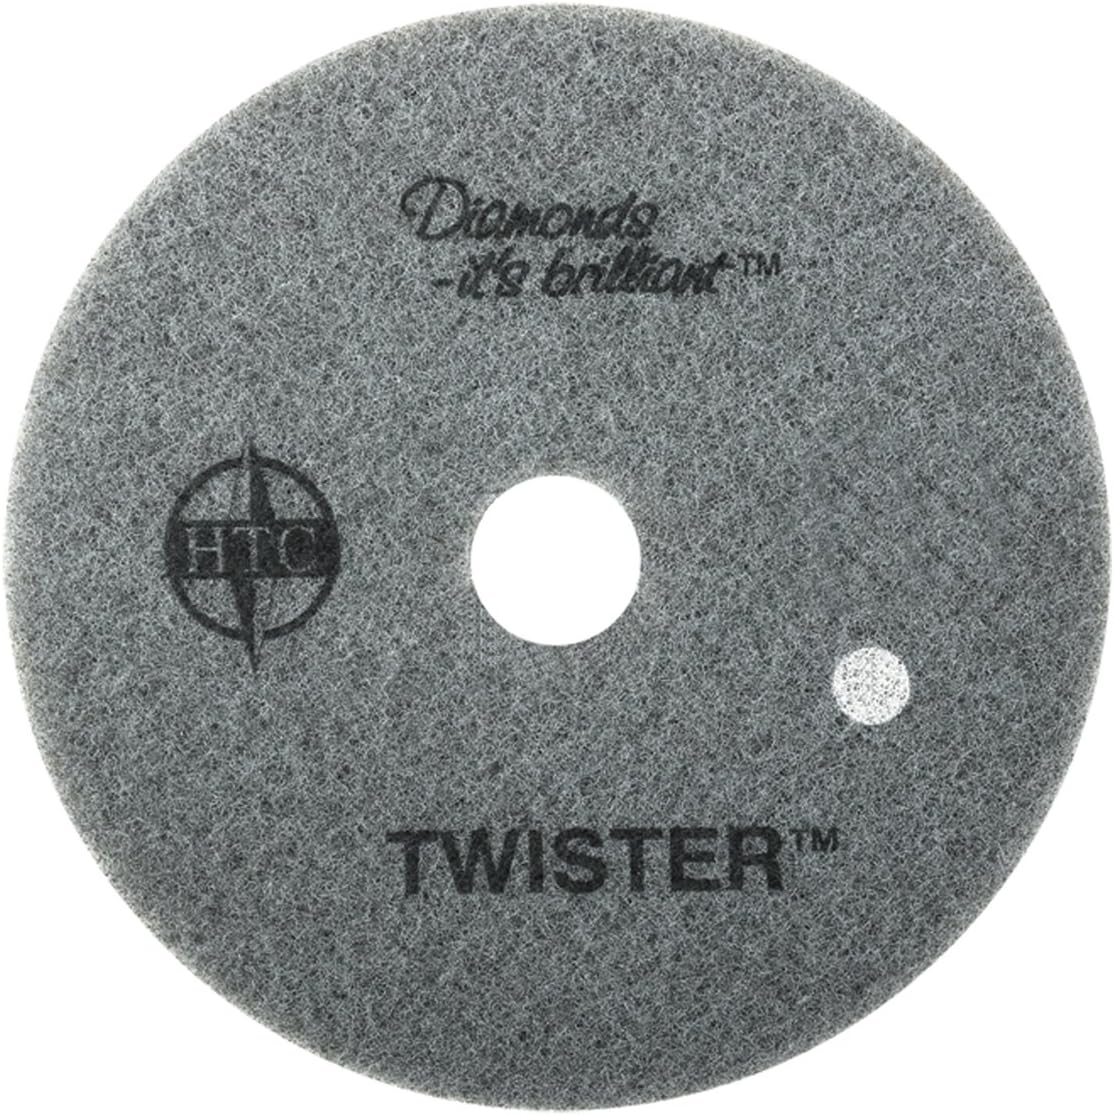 Americo Manufacturing 435320 Twister White 800 Grit Floor Pad for Step 1 Deep Cleaning (2 Pack), 20"